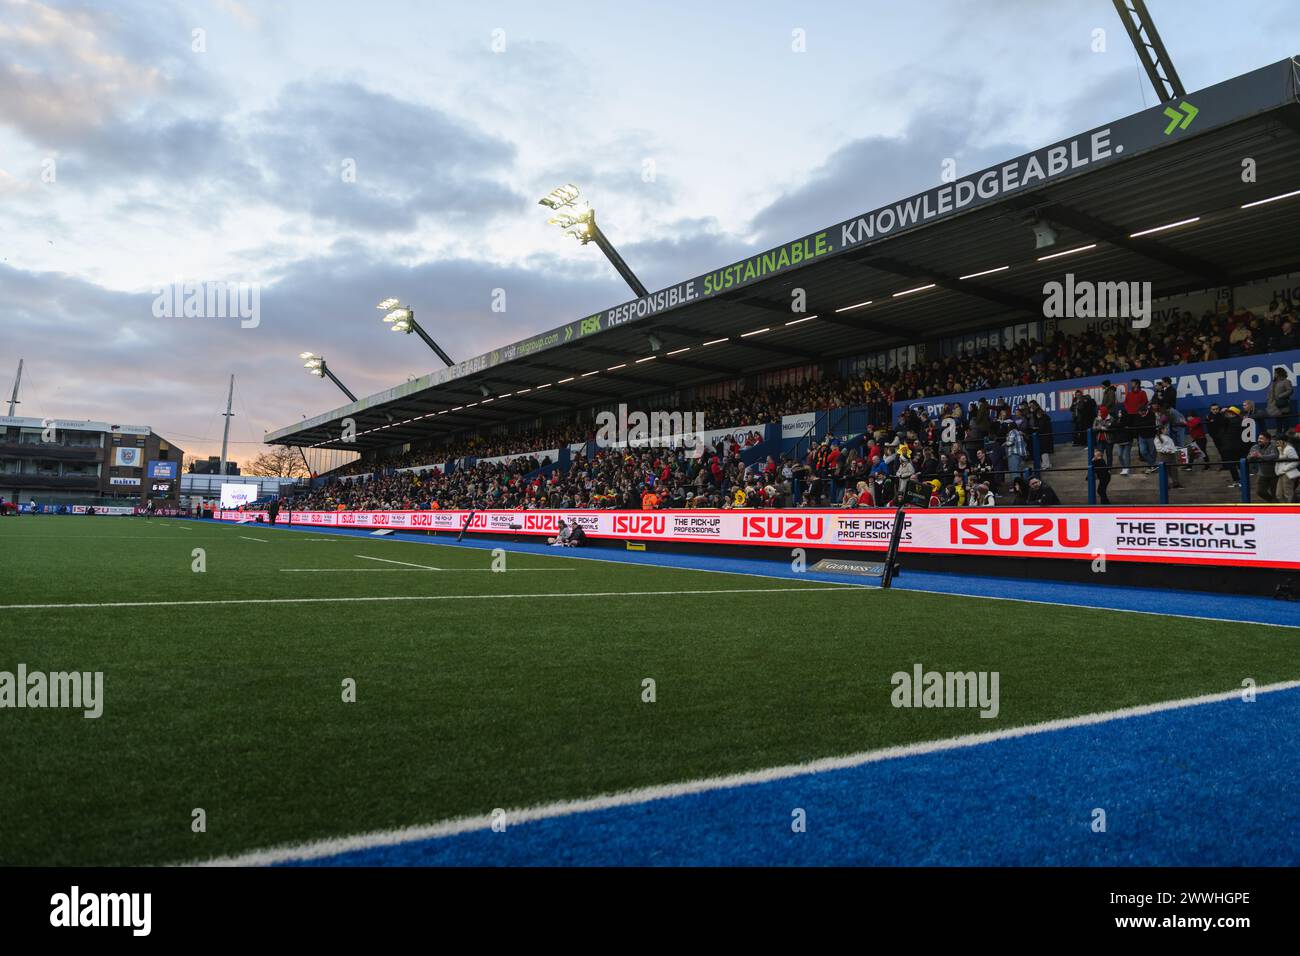 Cardiff, Wales. 23rd March 2024. Views of the stadium during the Women’s Six Nations rugby match, Wales versus Scotland at Cardiff Park Arms Stadium in Cardiff, Wales. Credit: Sam Hardwick/Alamy Live News. Stock Photo